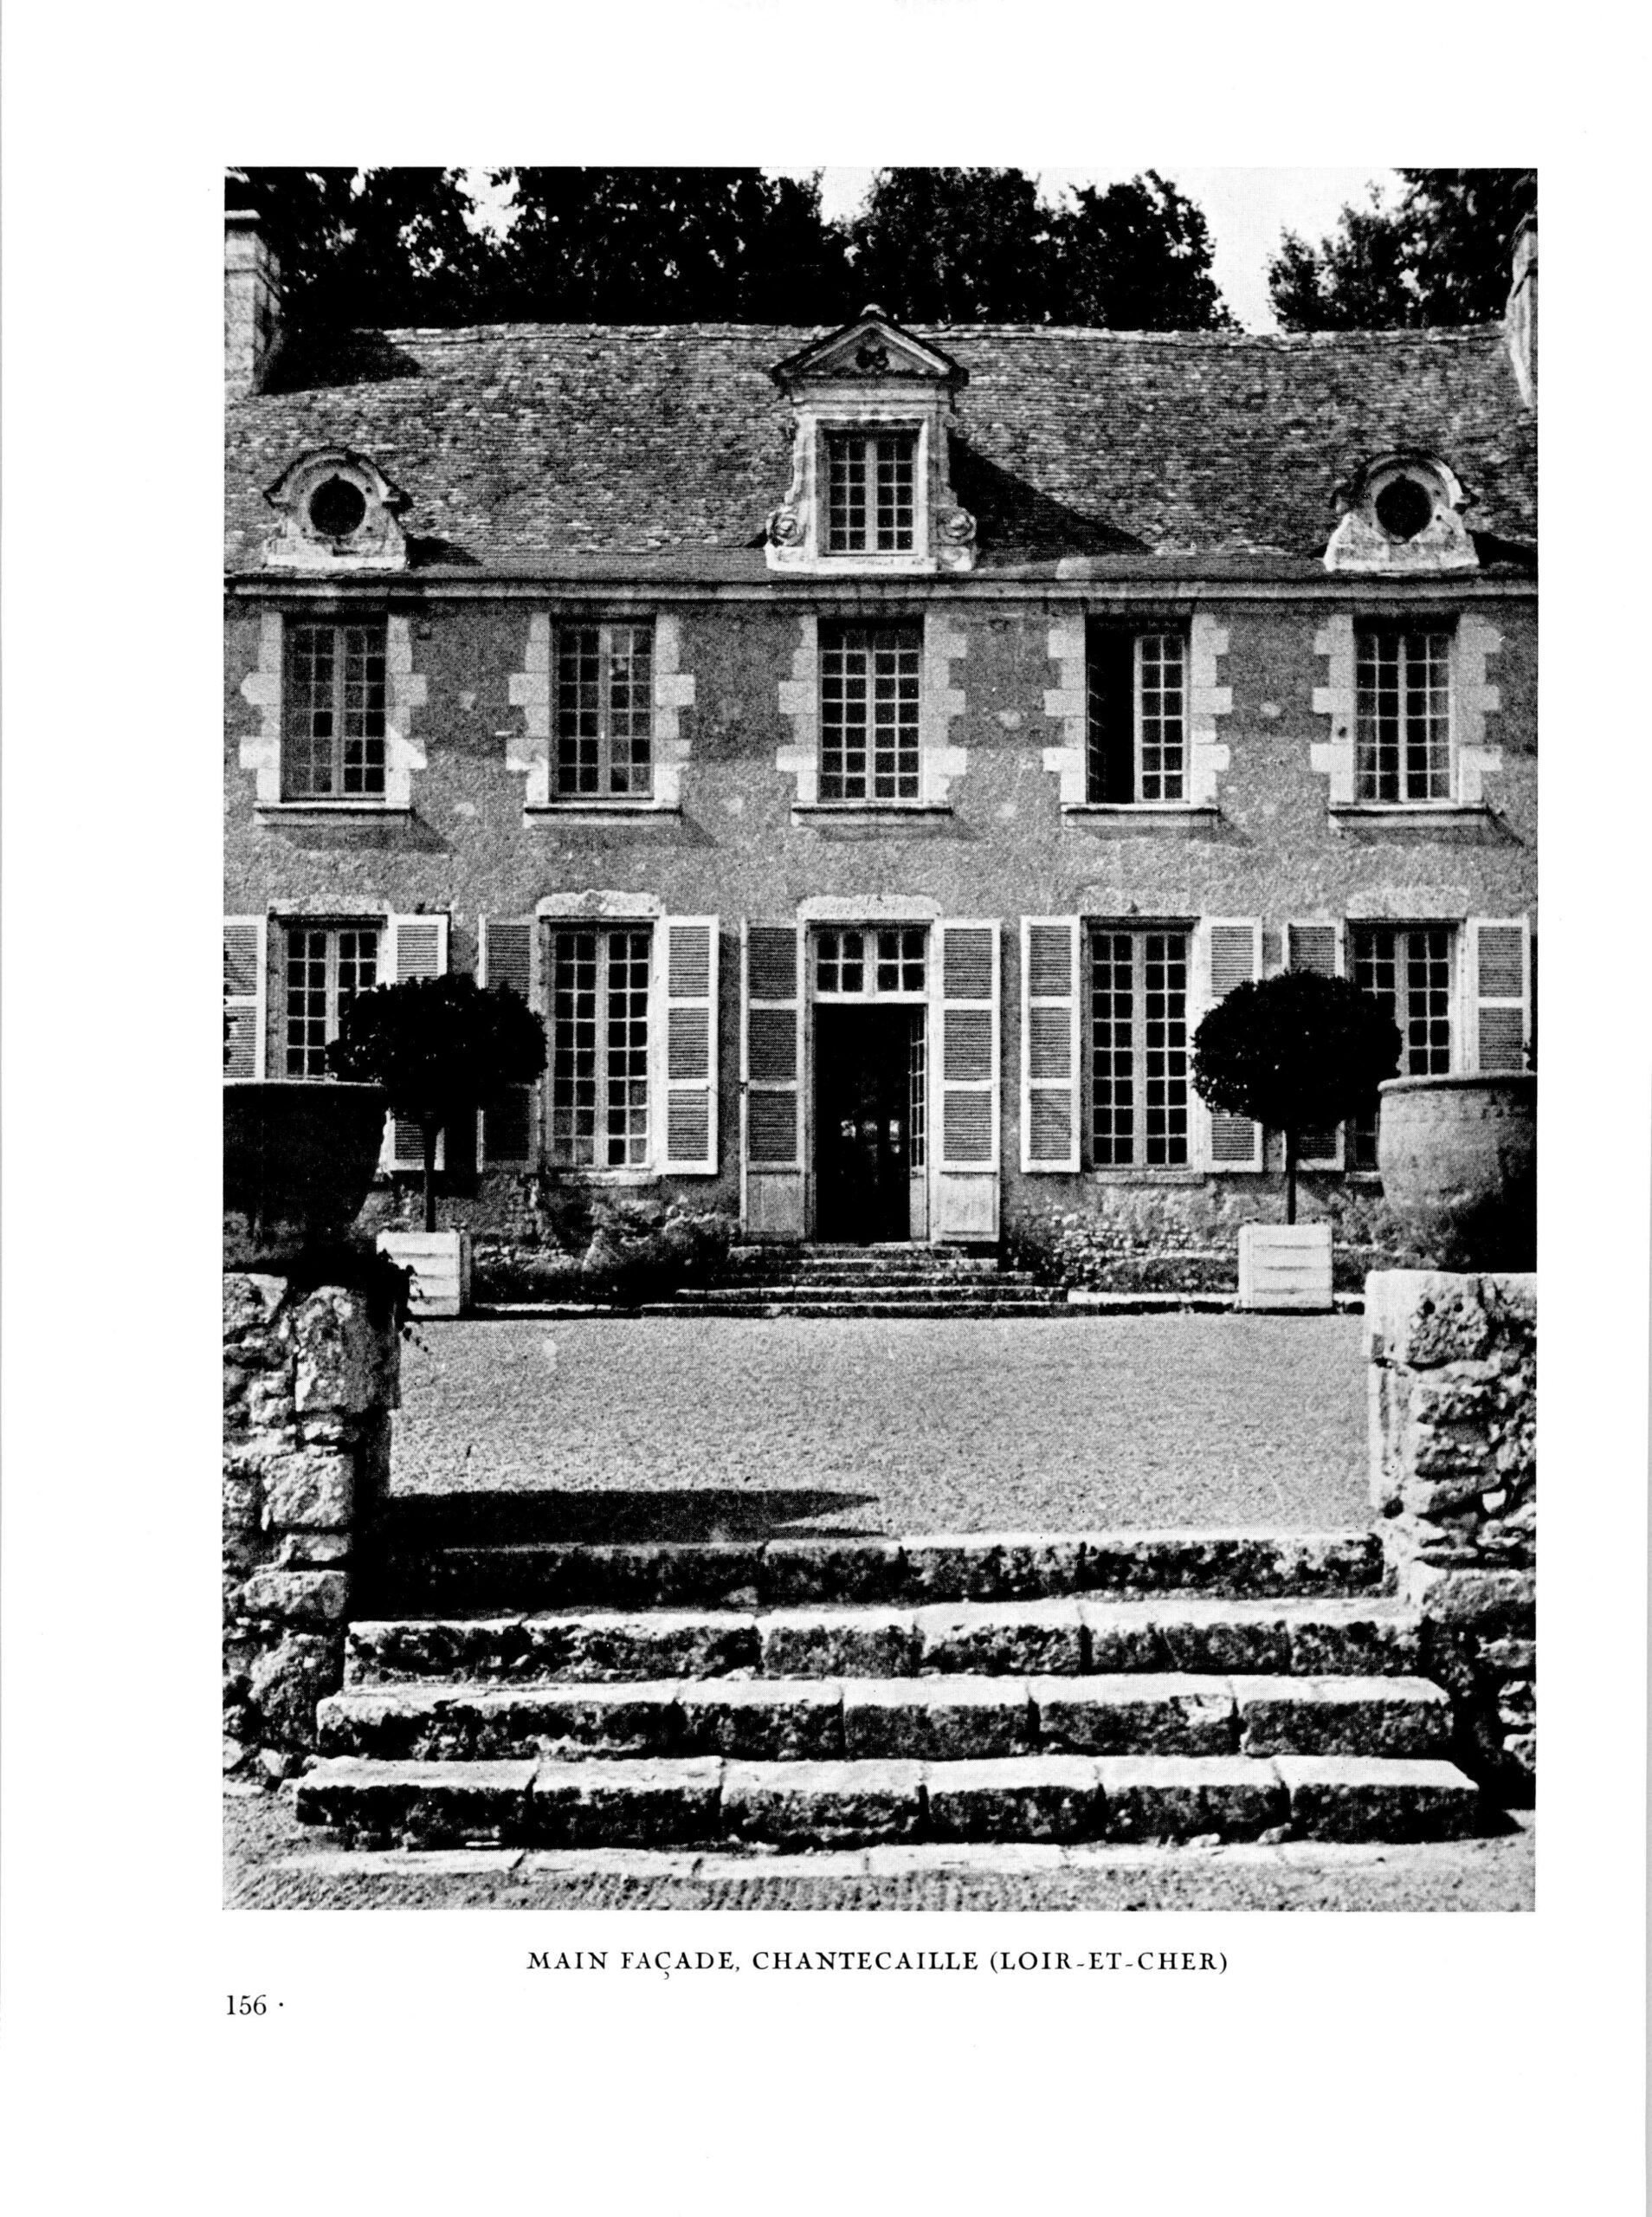 The Tuileries Brochures: French Architecture Volumes III-IV (1931-1932)